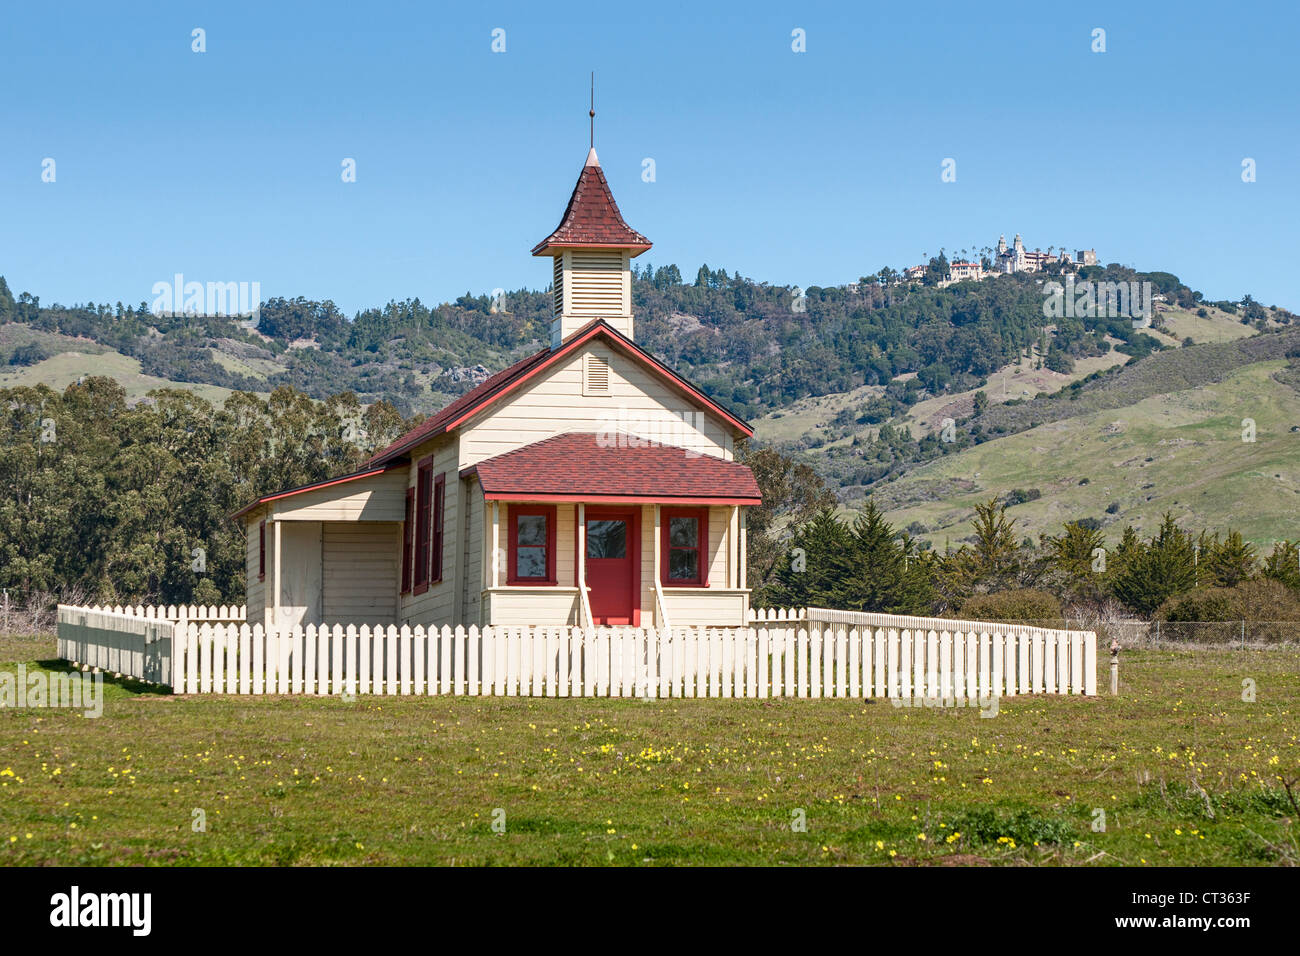 The Old San Simeon Schoolhouse in California with the famous Hearst Castle in the background. Stock Photo